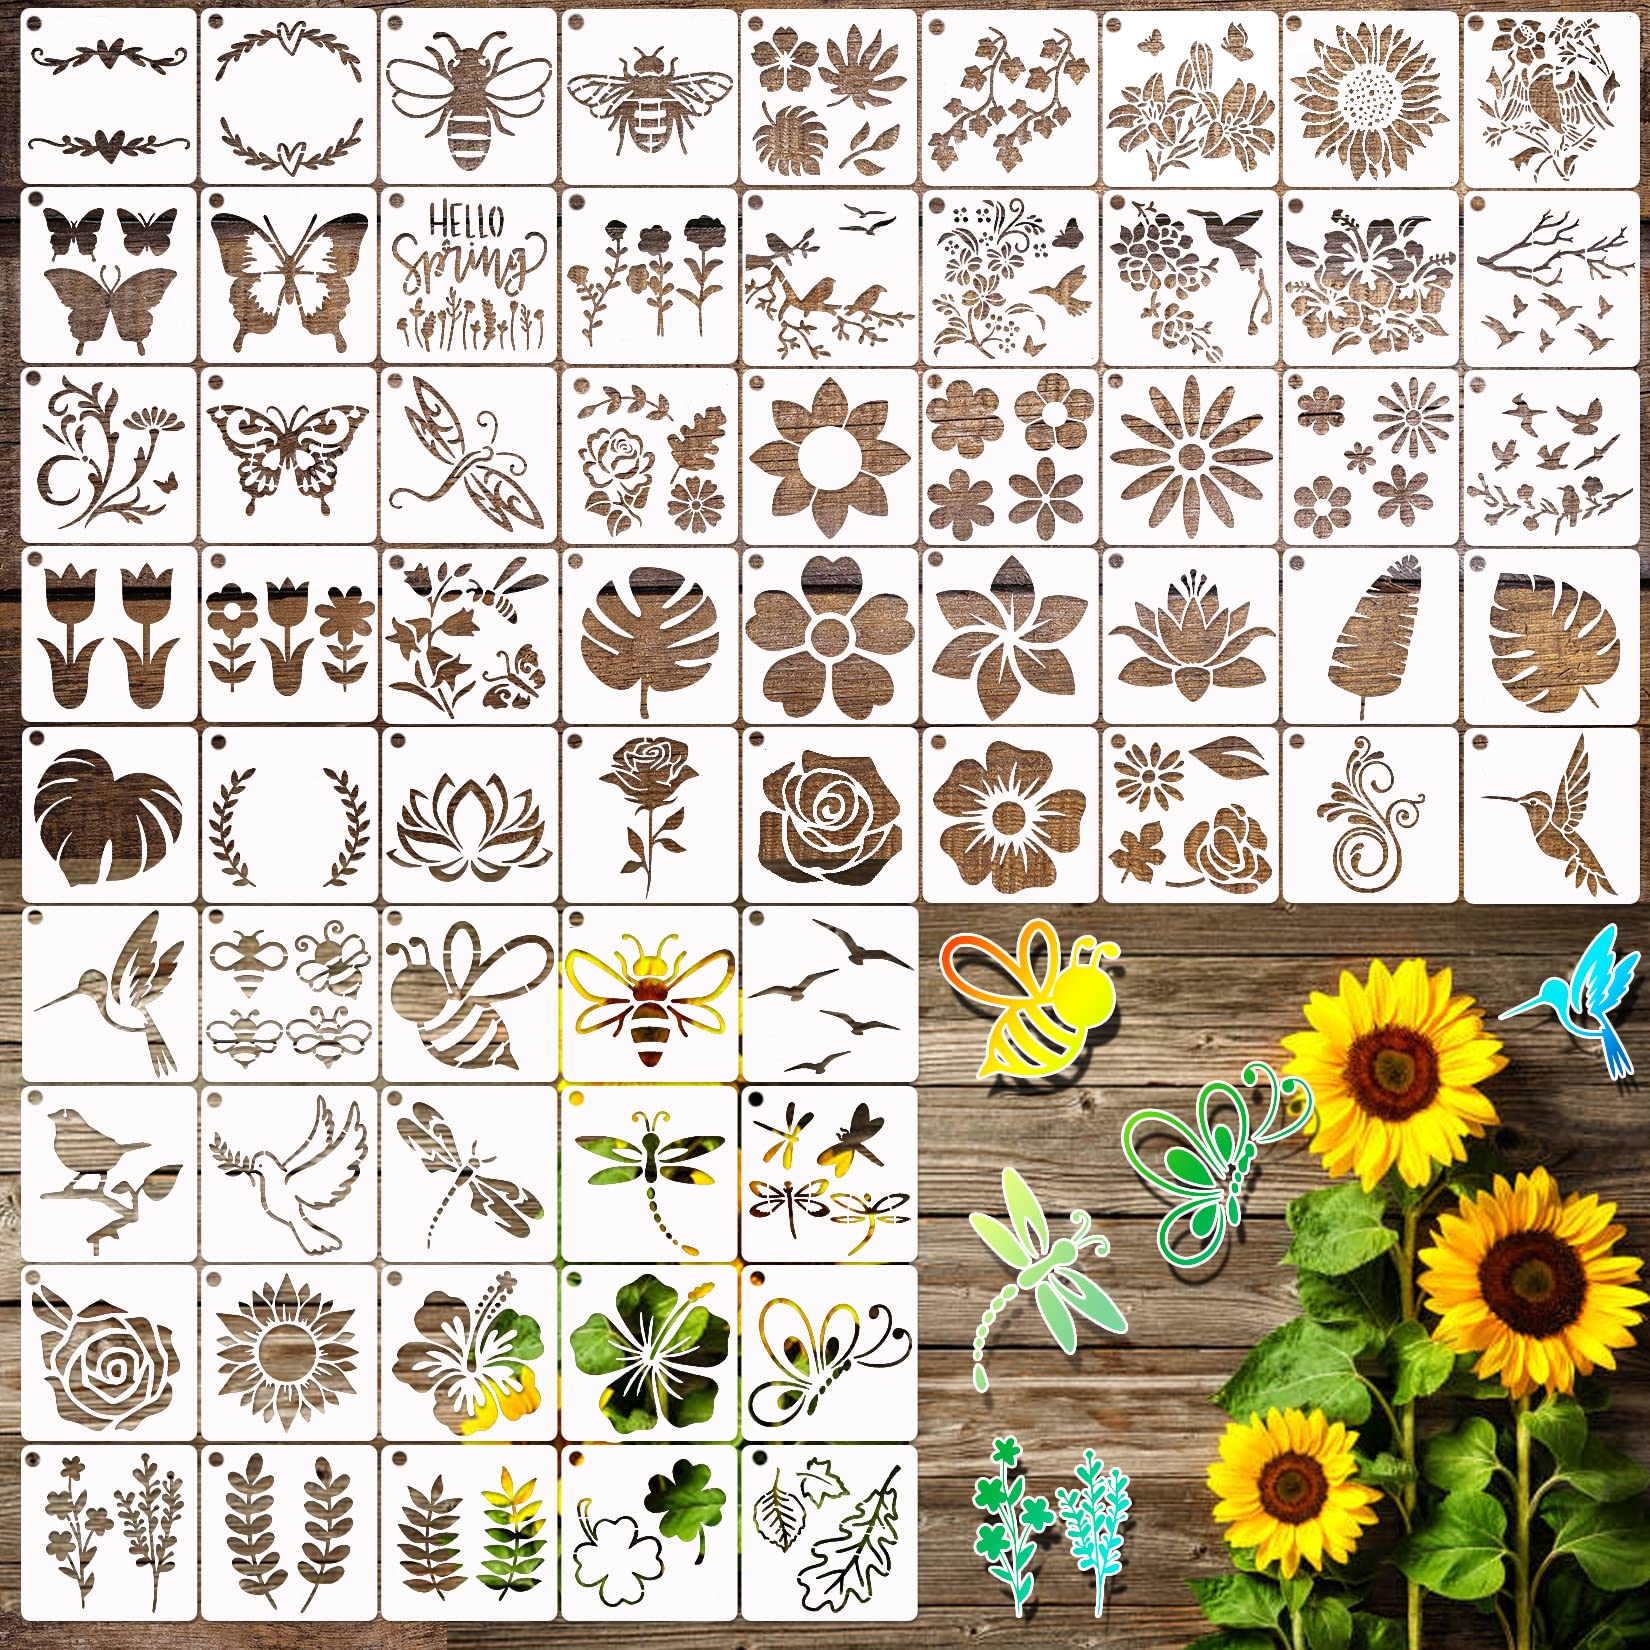 100 Pieces Stencil for Painting,3 Inch Flower Stencils DIY Craft Animal  Reusable Template Paint Stencils for Painting on Wood, Crafts, Wall Home  Decor